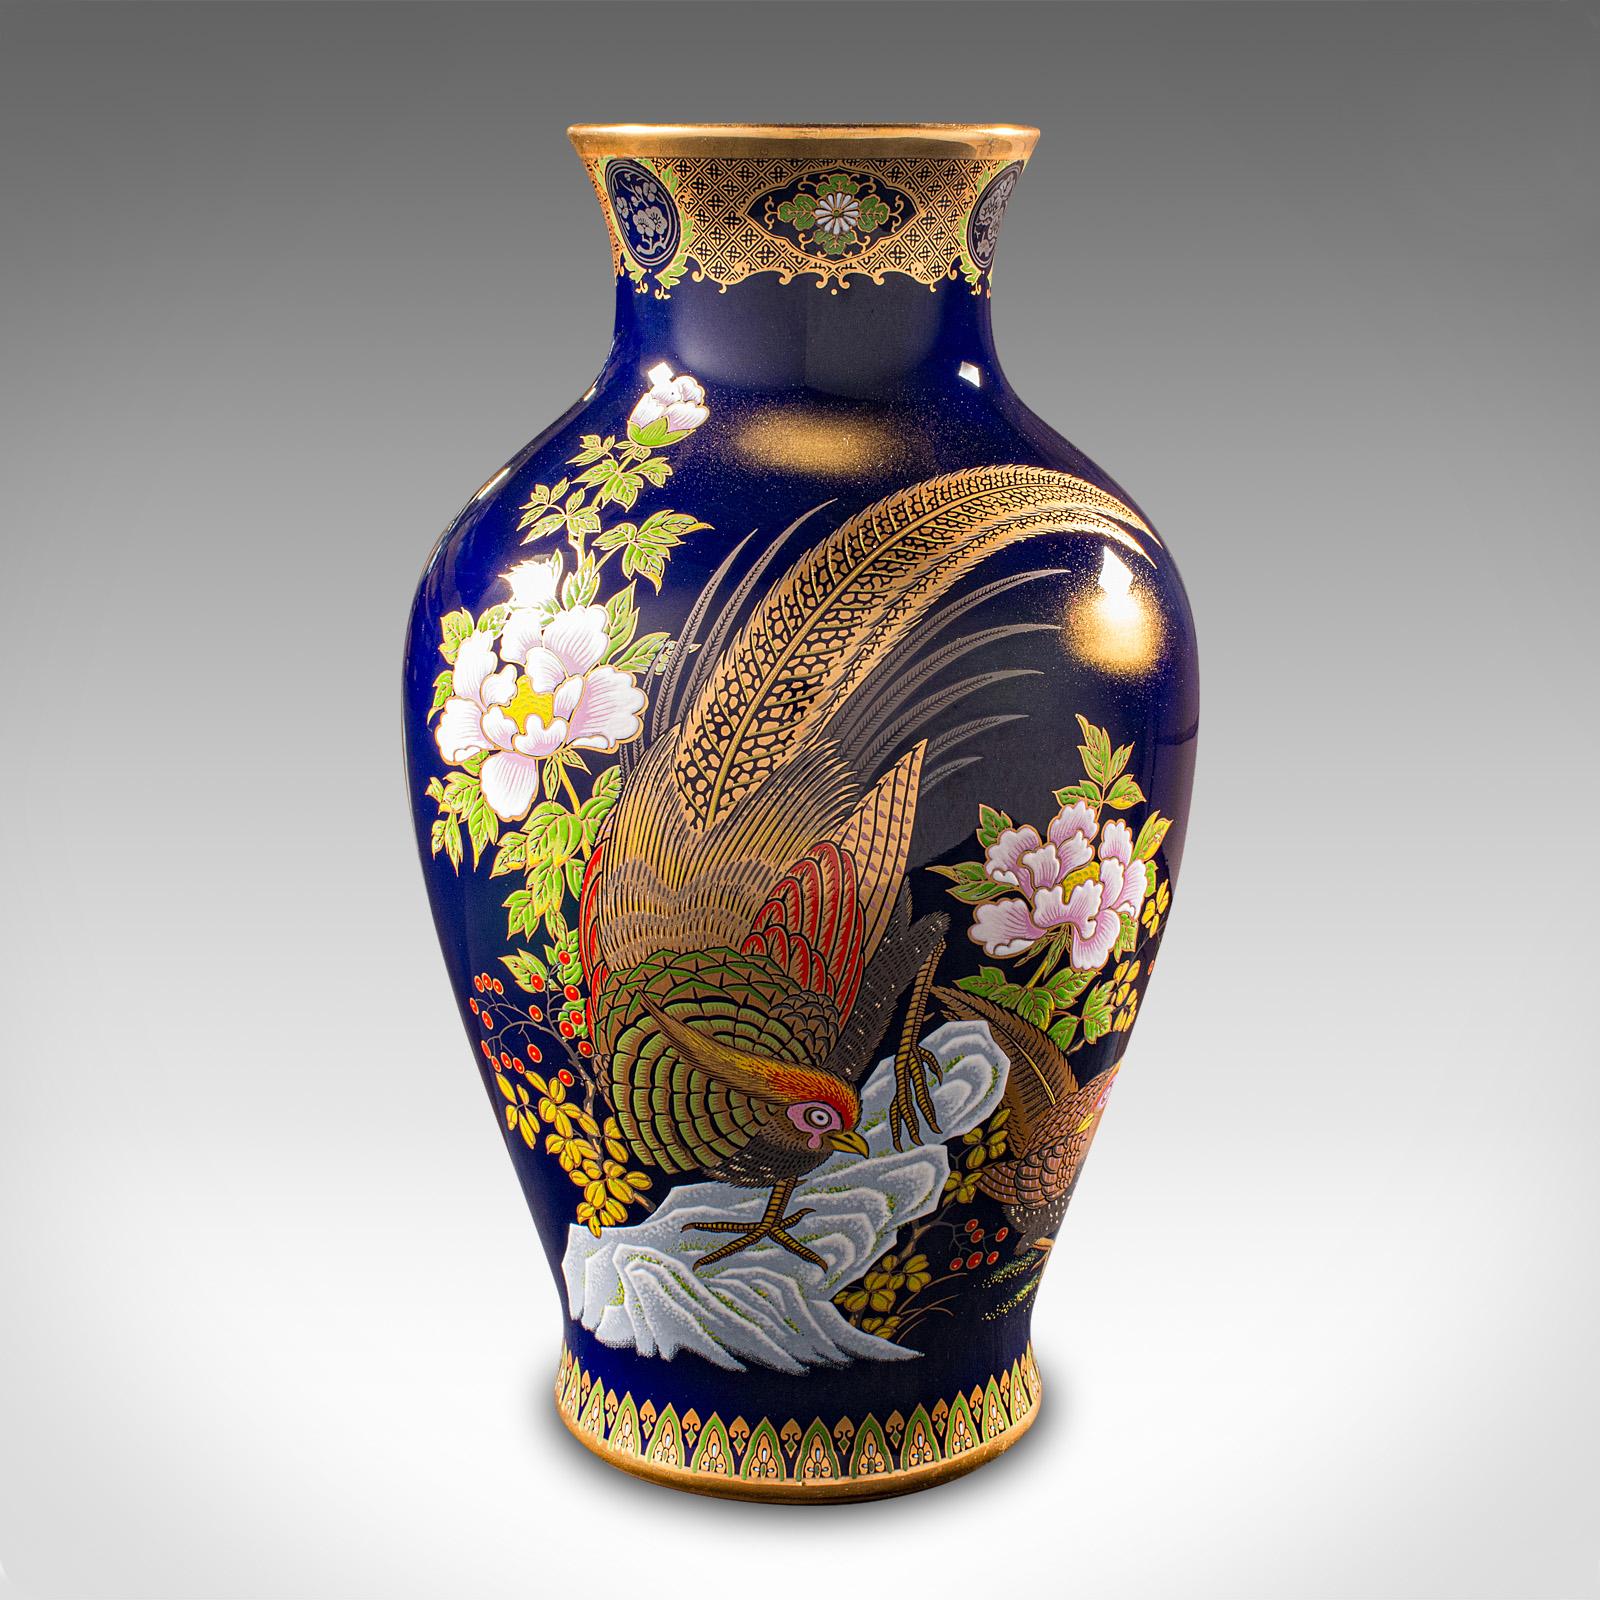 This is a vintage pheasant vase. A Chinese, lacquer ceramic baluster urn, dating to the late 20th century, circa 1980.

Superb baluster vase with a striking decorative finish
Displaying a desirable aged patina and in good order
Deep cobalt blue